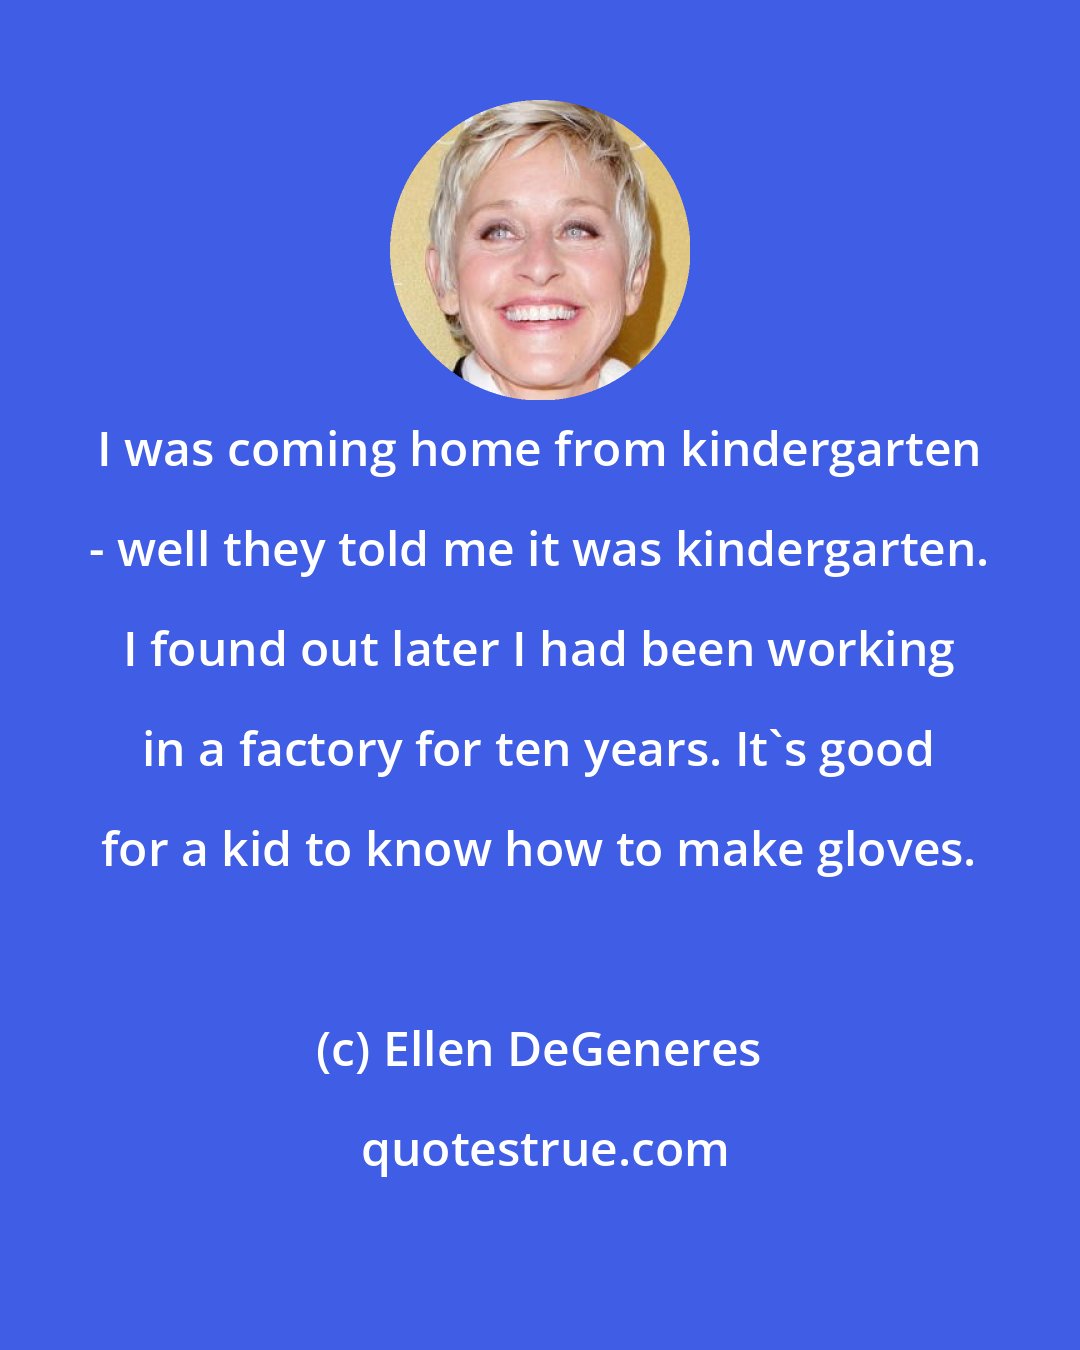 Ellen DeGeneres: I was coming home from kindergarten - well they told me it was kindergarten. I found out later I had been working in a factory for ten years. It's good for a kid to know how to make gloves.